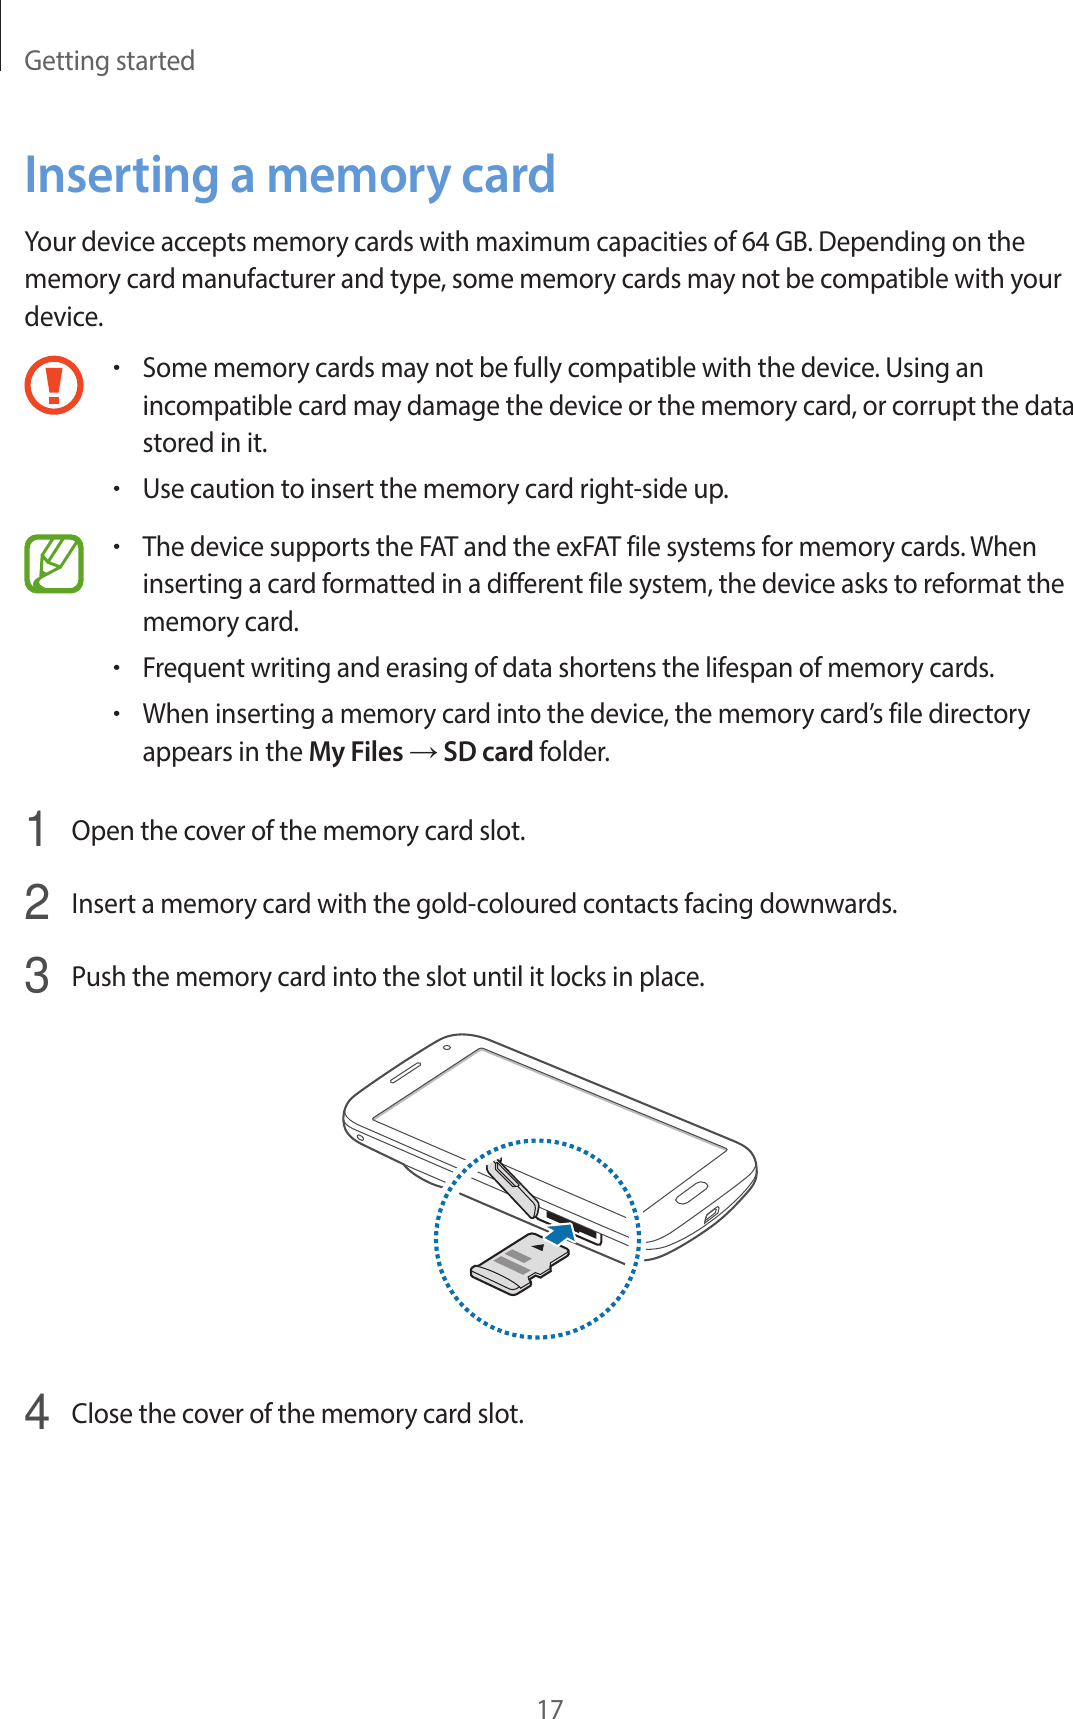 Getting started17Inserting a memory cardYour device accepts memory cards with maximum capacities of 64 GB. Depending on the memory card manufacturer and type, some memory cards may not be compatible with your device.•Some memory cards may not be fully compatible with the device. Using an incompatible card may damage the device or the memory card, or corrupt the data stored in it.•Use caution to insert the memory card right-side up.•The device supports the FAT and the exFAT file systems for memory cards. When inserting a card formatted in a different file system, the device asks to reformat the memory card.•Frequent writing and erasing of data shortens the lifespan of memory cards.•When inserting a memory card into the device, the memory card’s file directory appears in the My Files → SD card folder.1  Open the cover of the memory card slot.2  Insert a memory card with the gold-coloured contacts facing downwards.3  Push the memory card into the slot until it locks in place.4  Close the cover of the memory card slot.